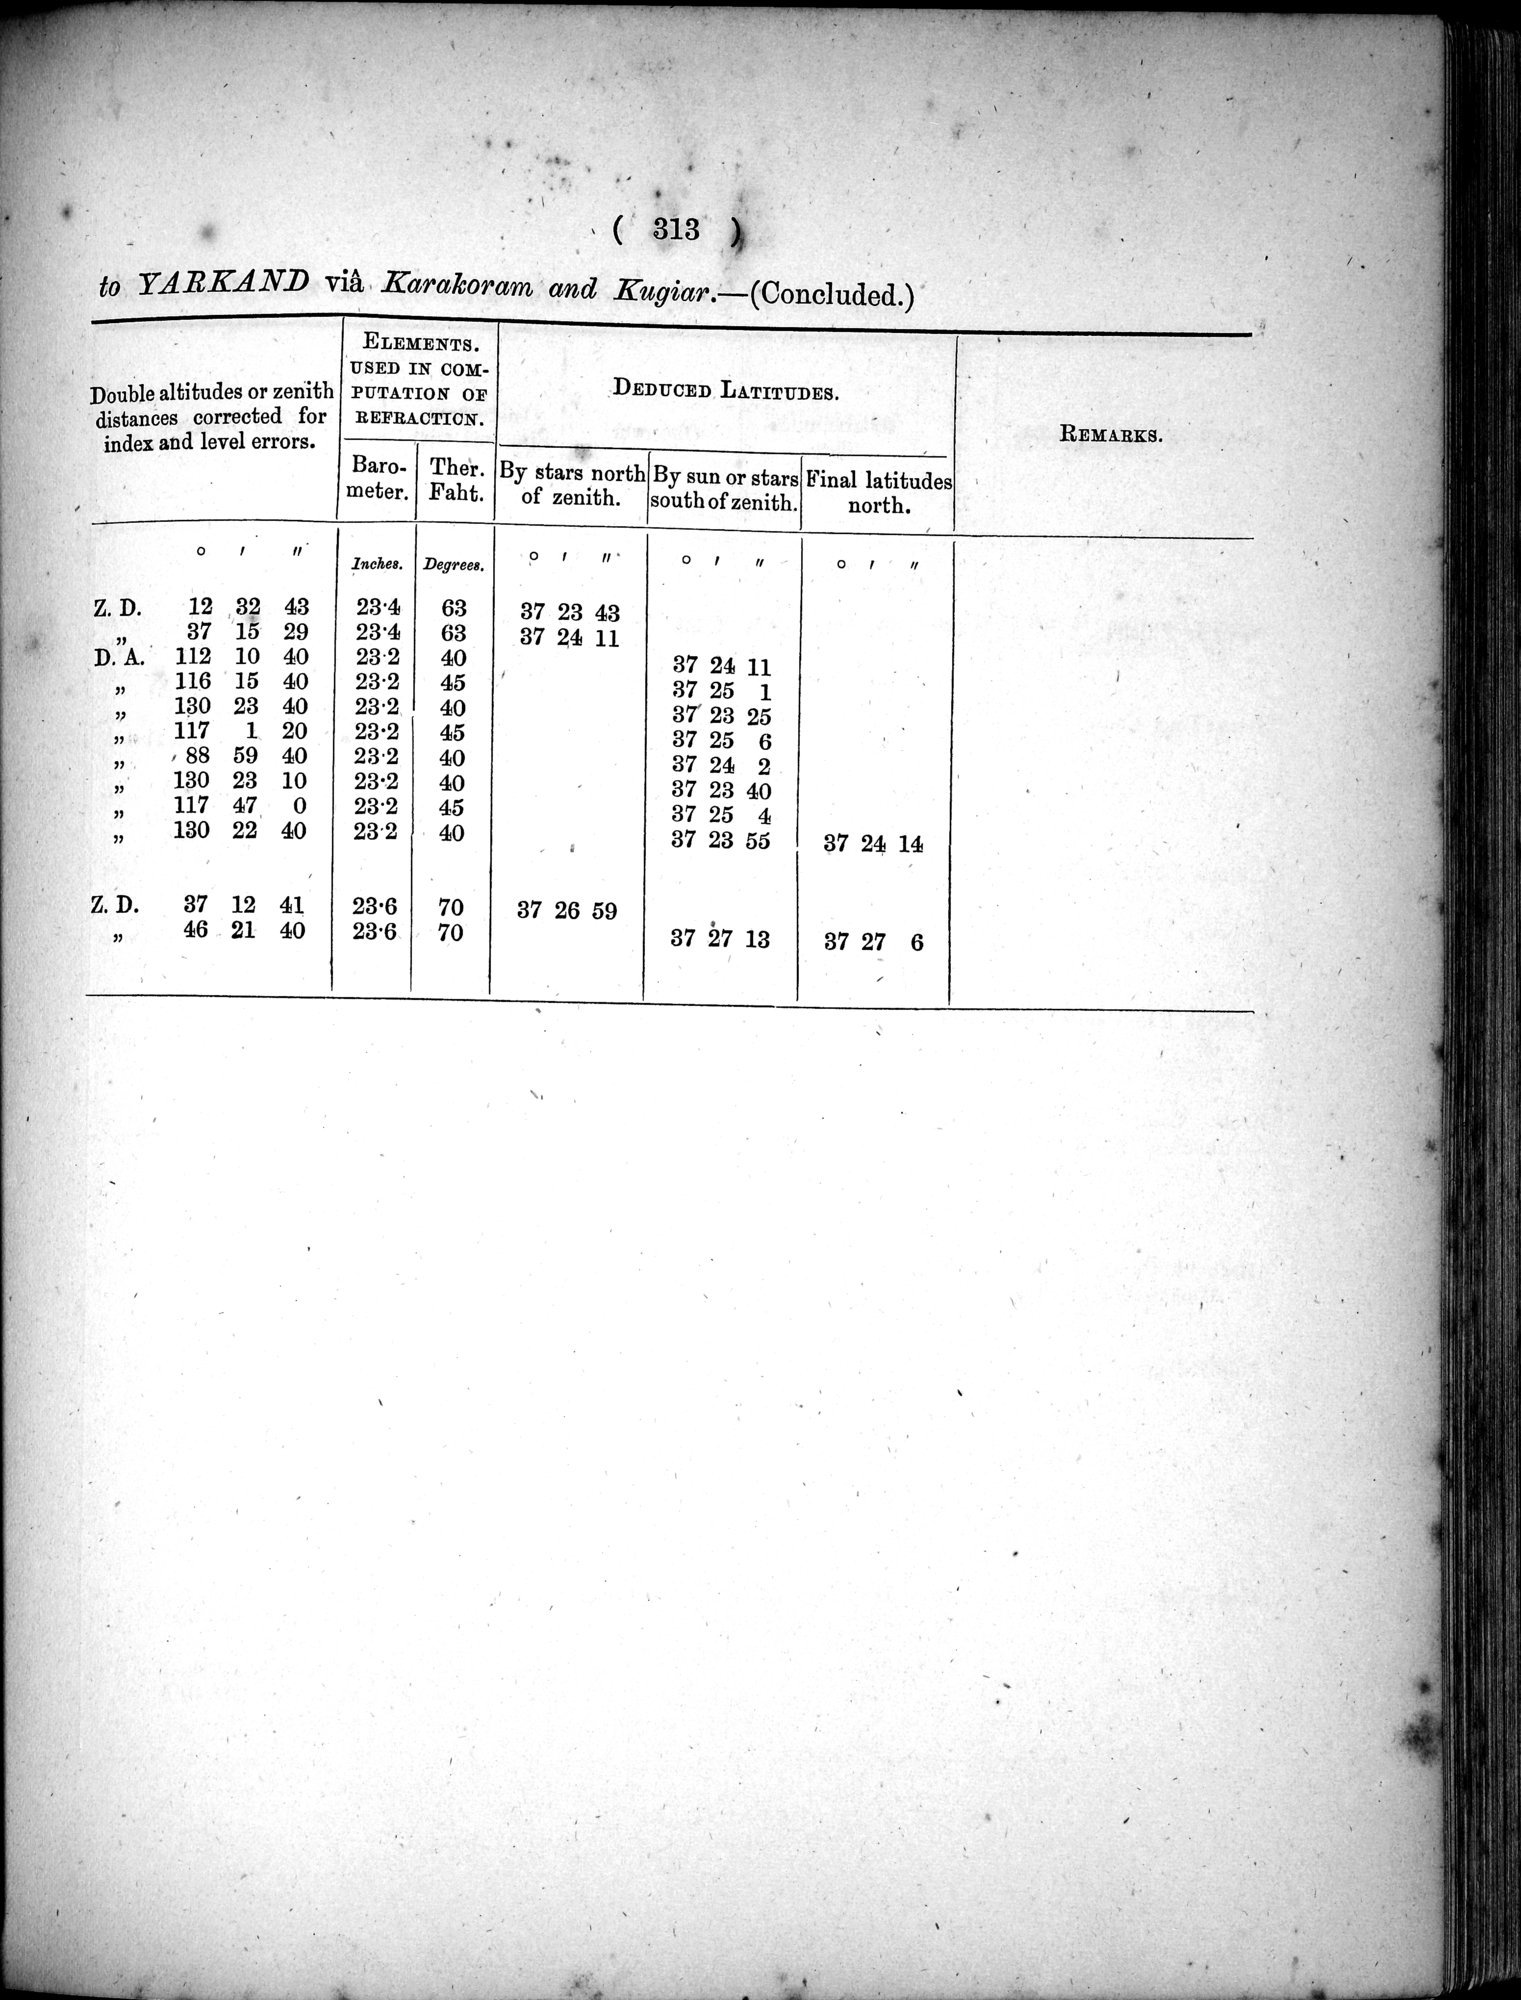 Report of a Mission to Yarkund in 1873 : vol.1 / Page 447 (Grayscale High Resolution Image)